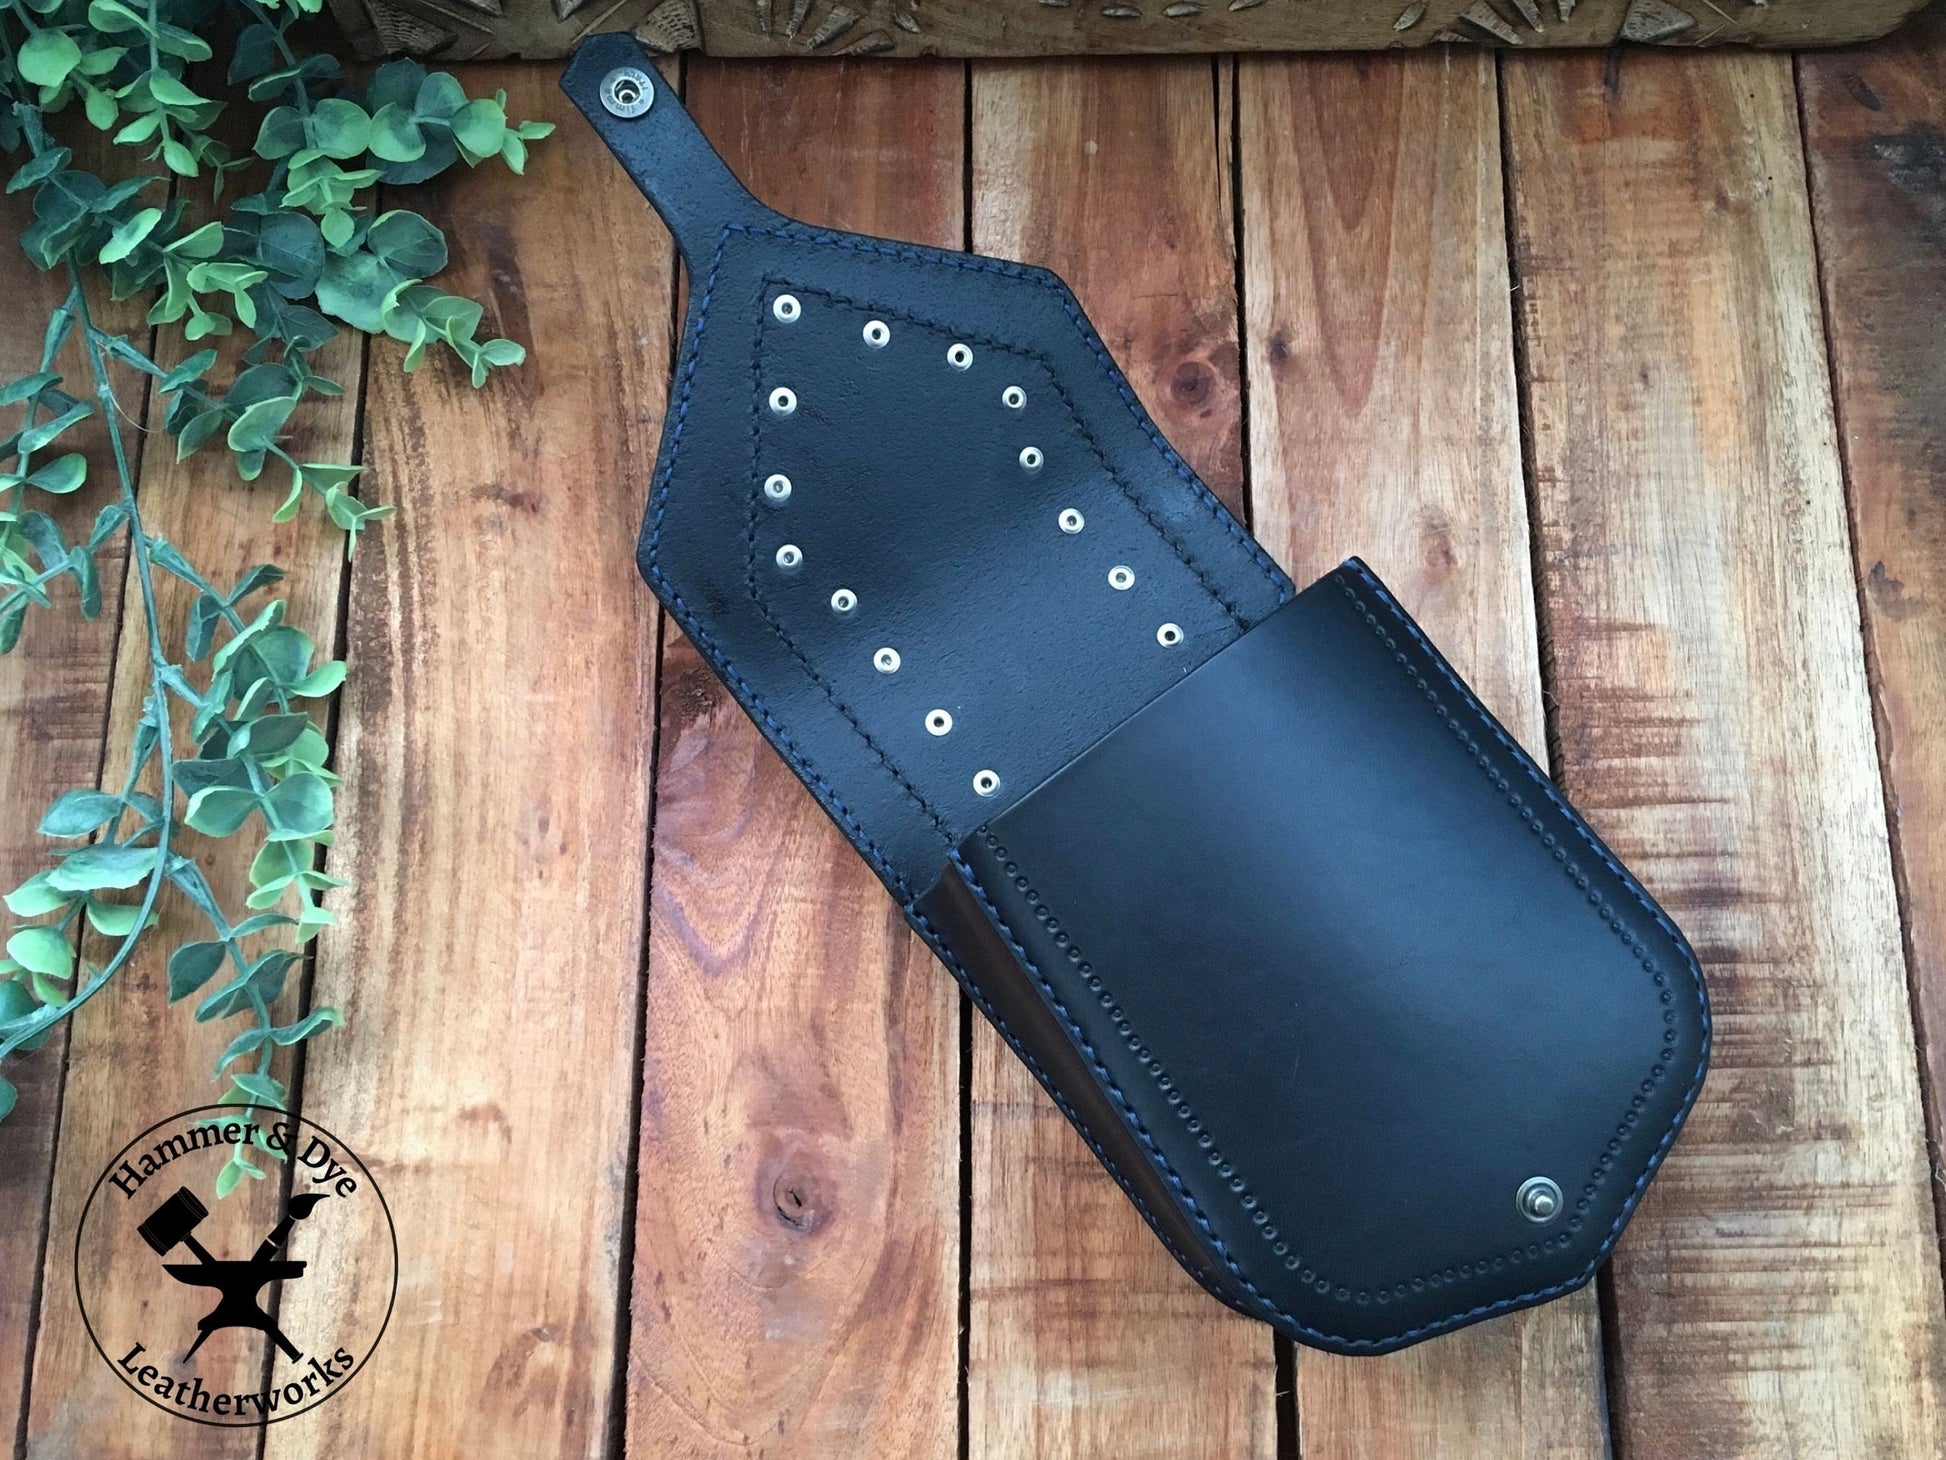 Handmade Two-tone Studded Leather Belt Bag in Black and Blue Open